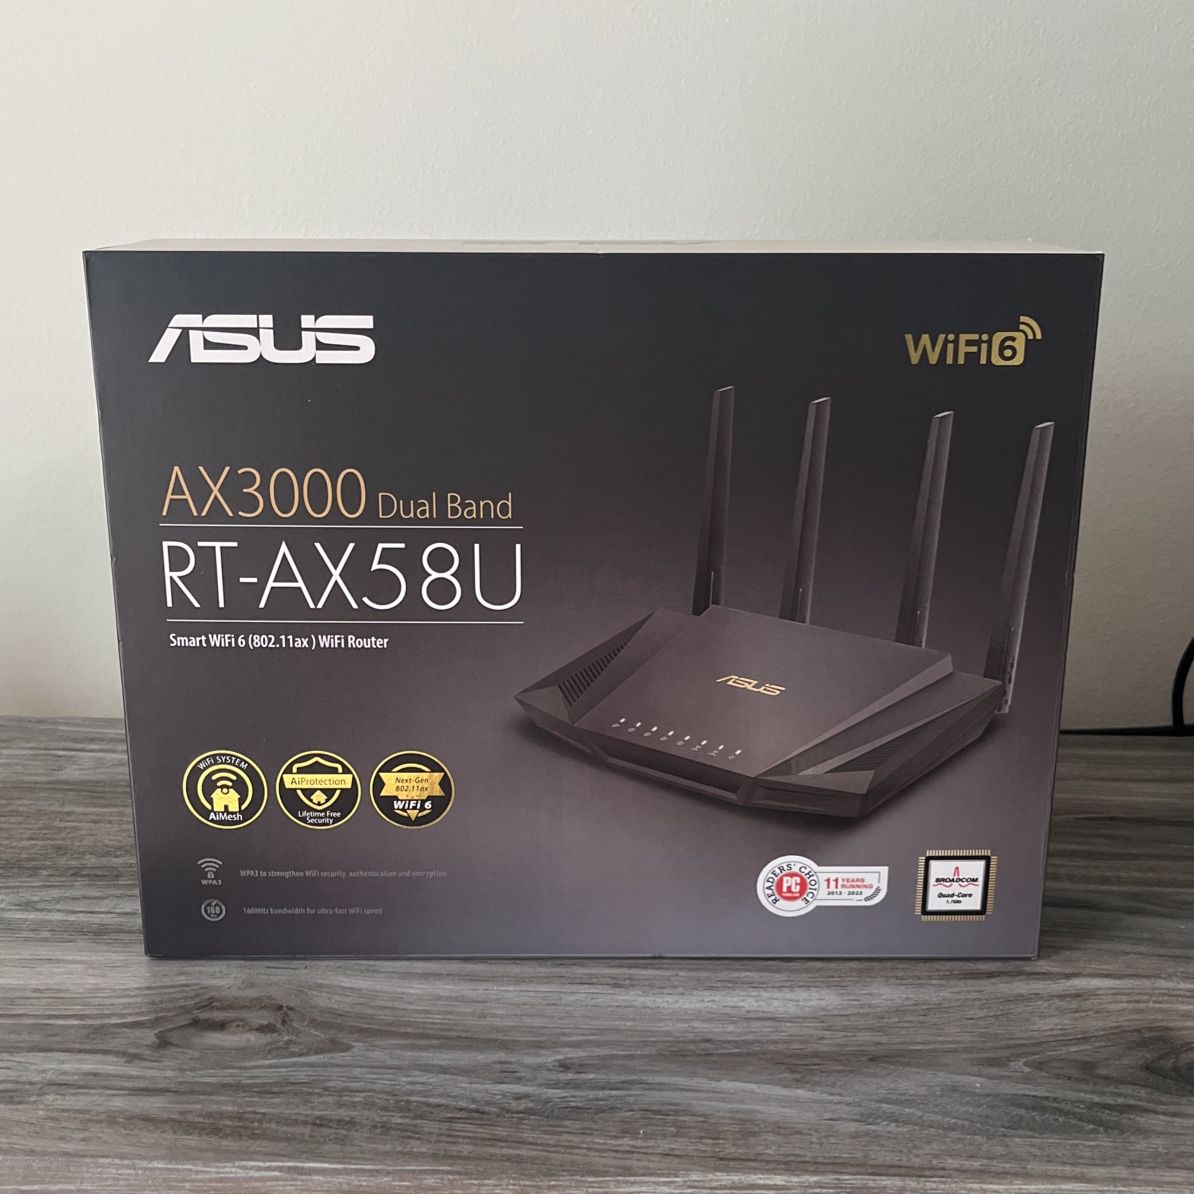  ASUS Router, RT-AX58U